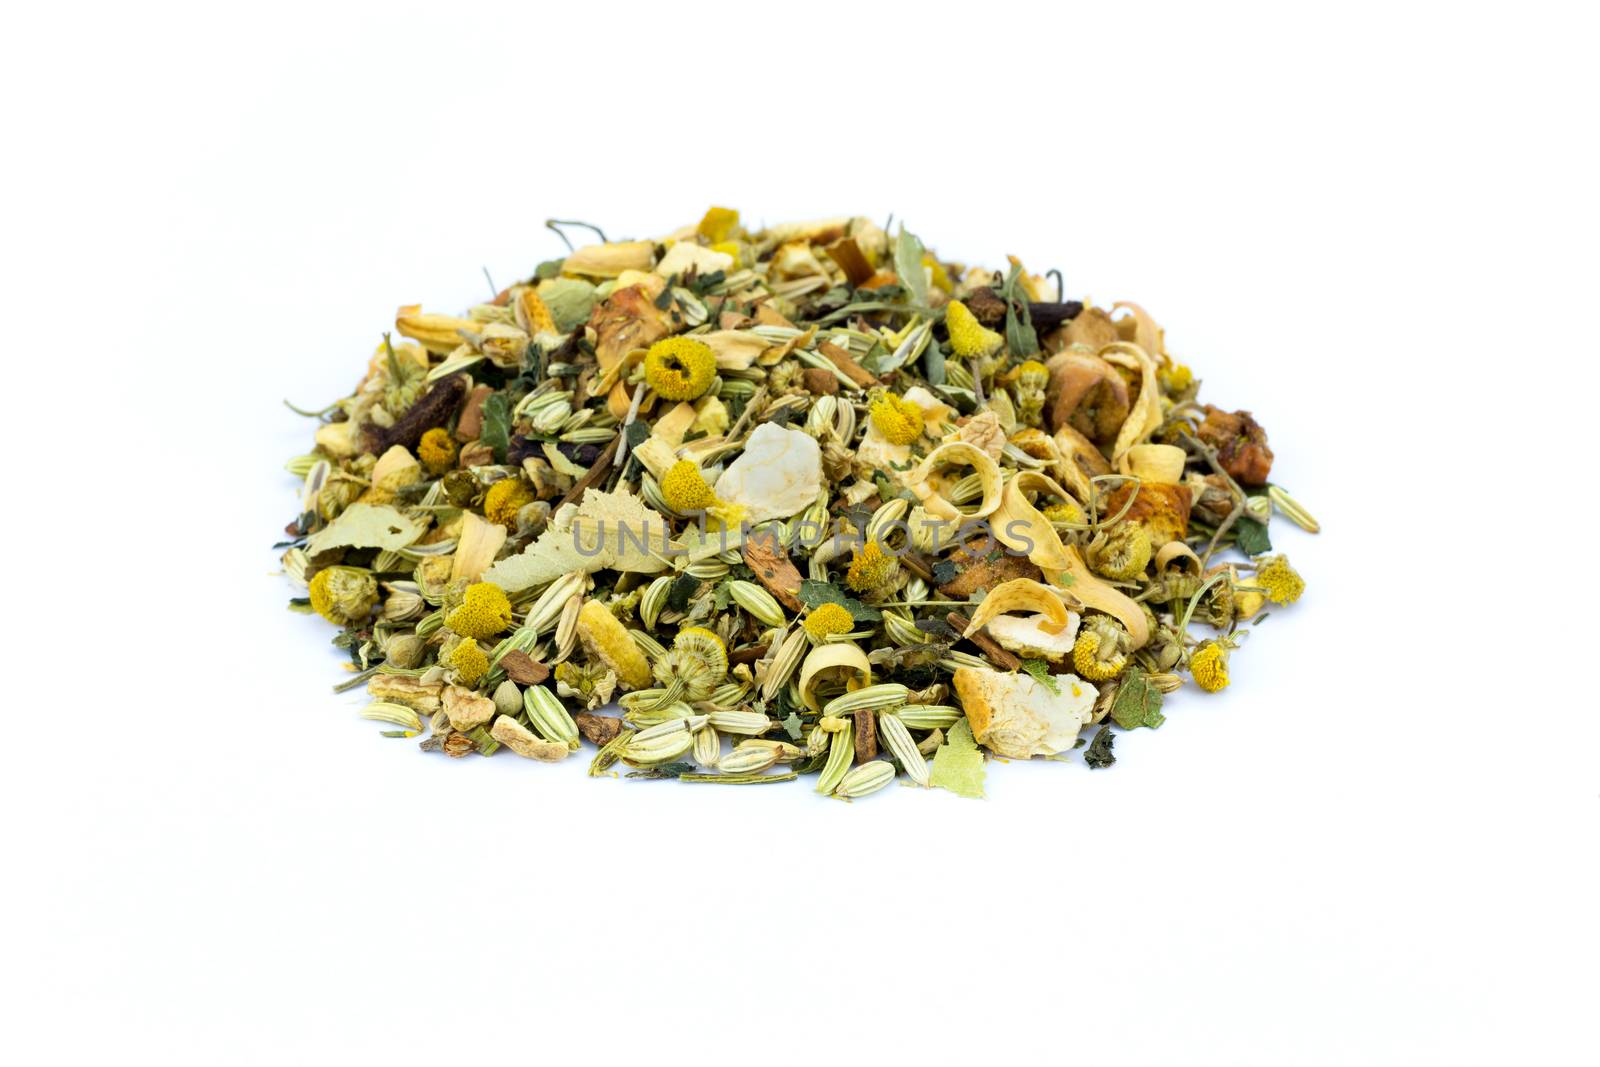 Heap of loose mixture of herbal tea isolated on white background